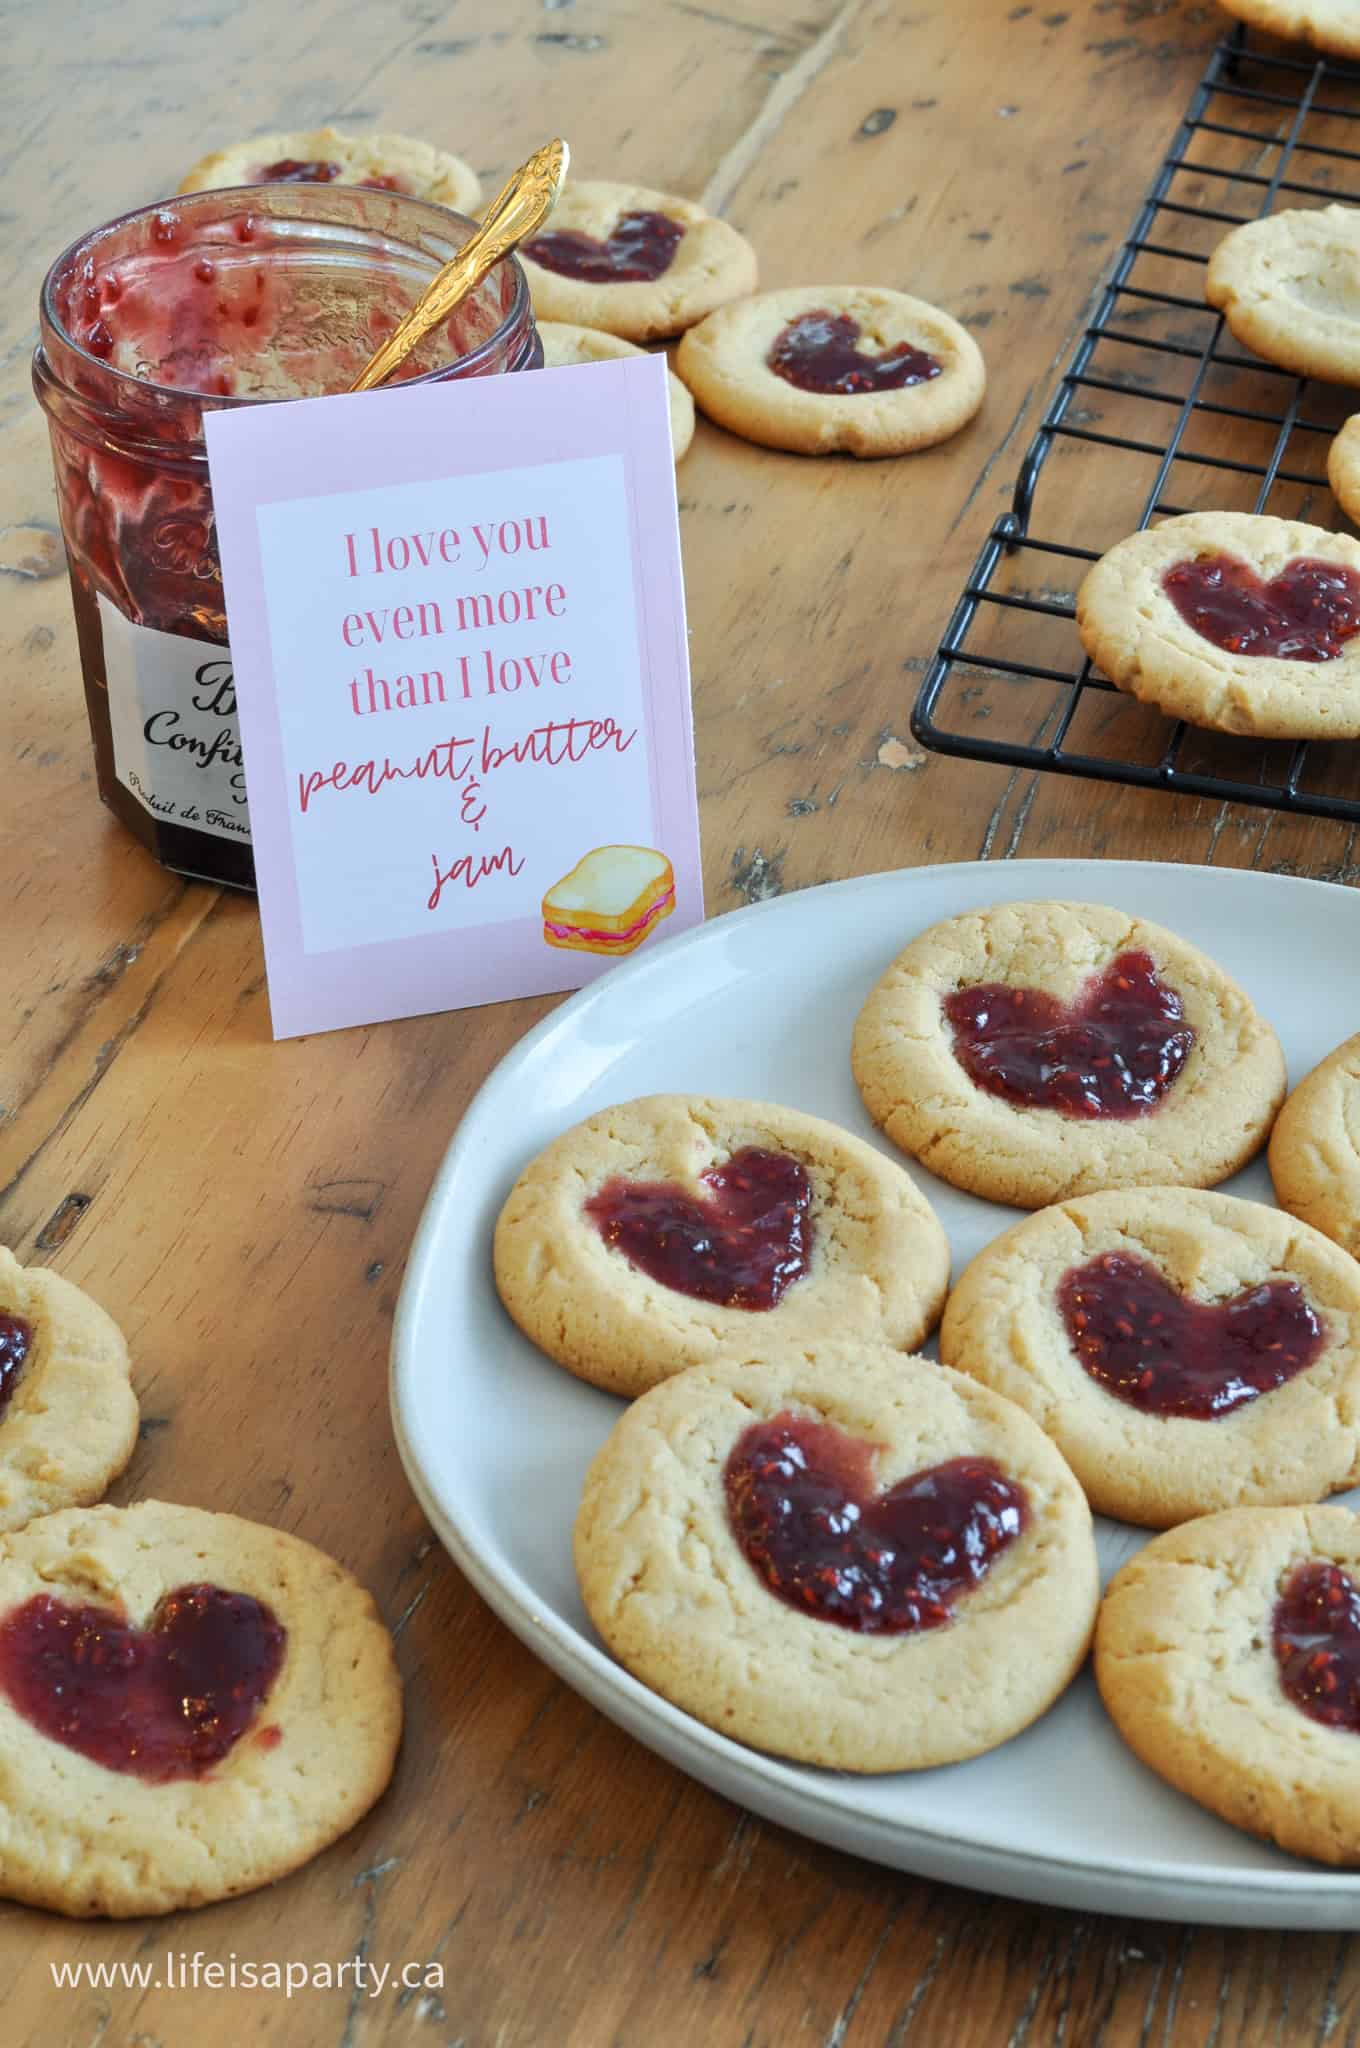 peanut butter and jam valentine card free printable